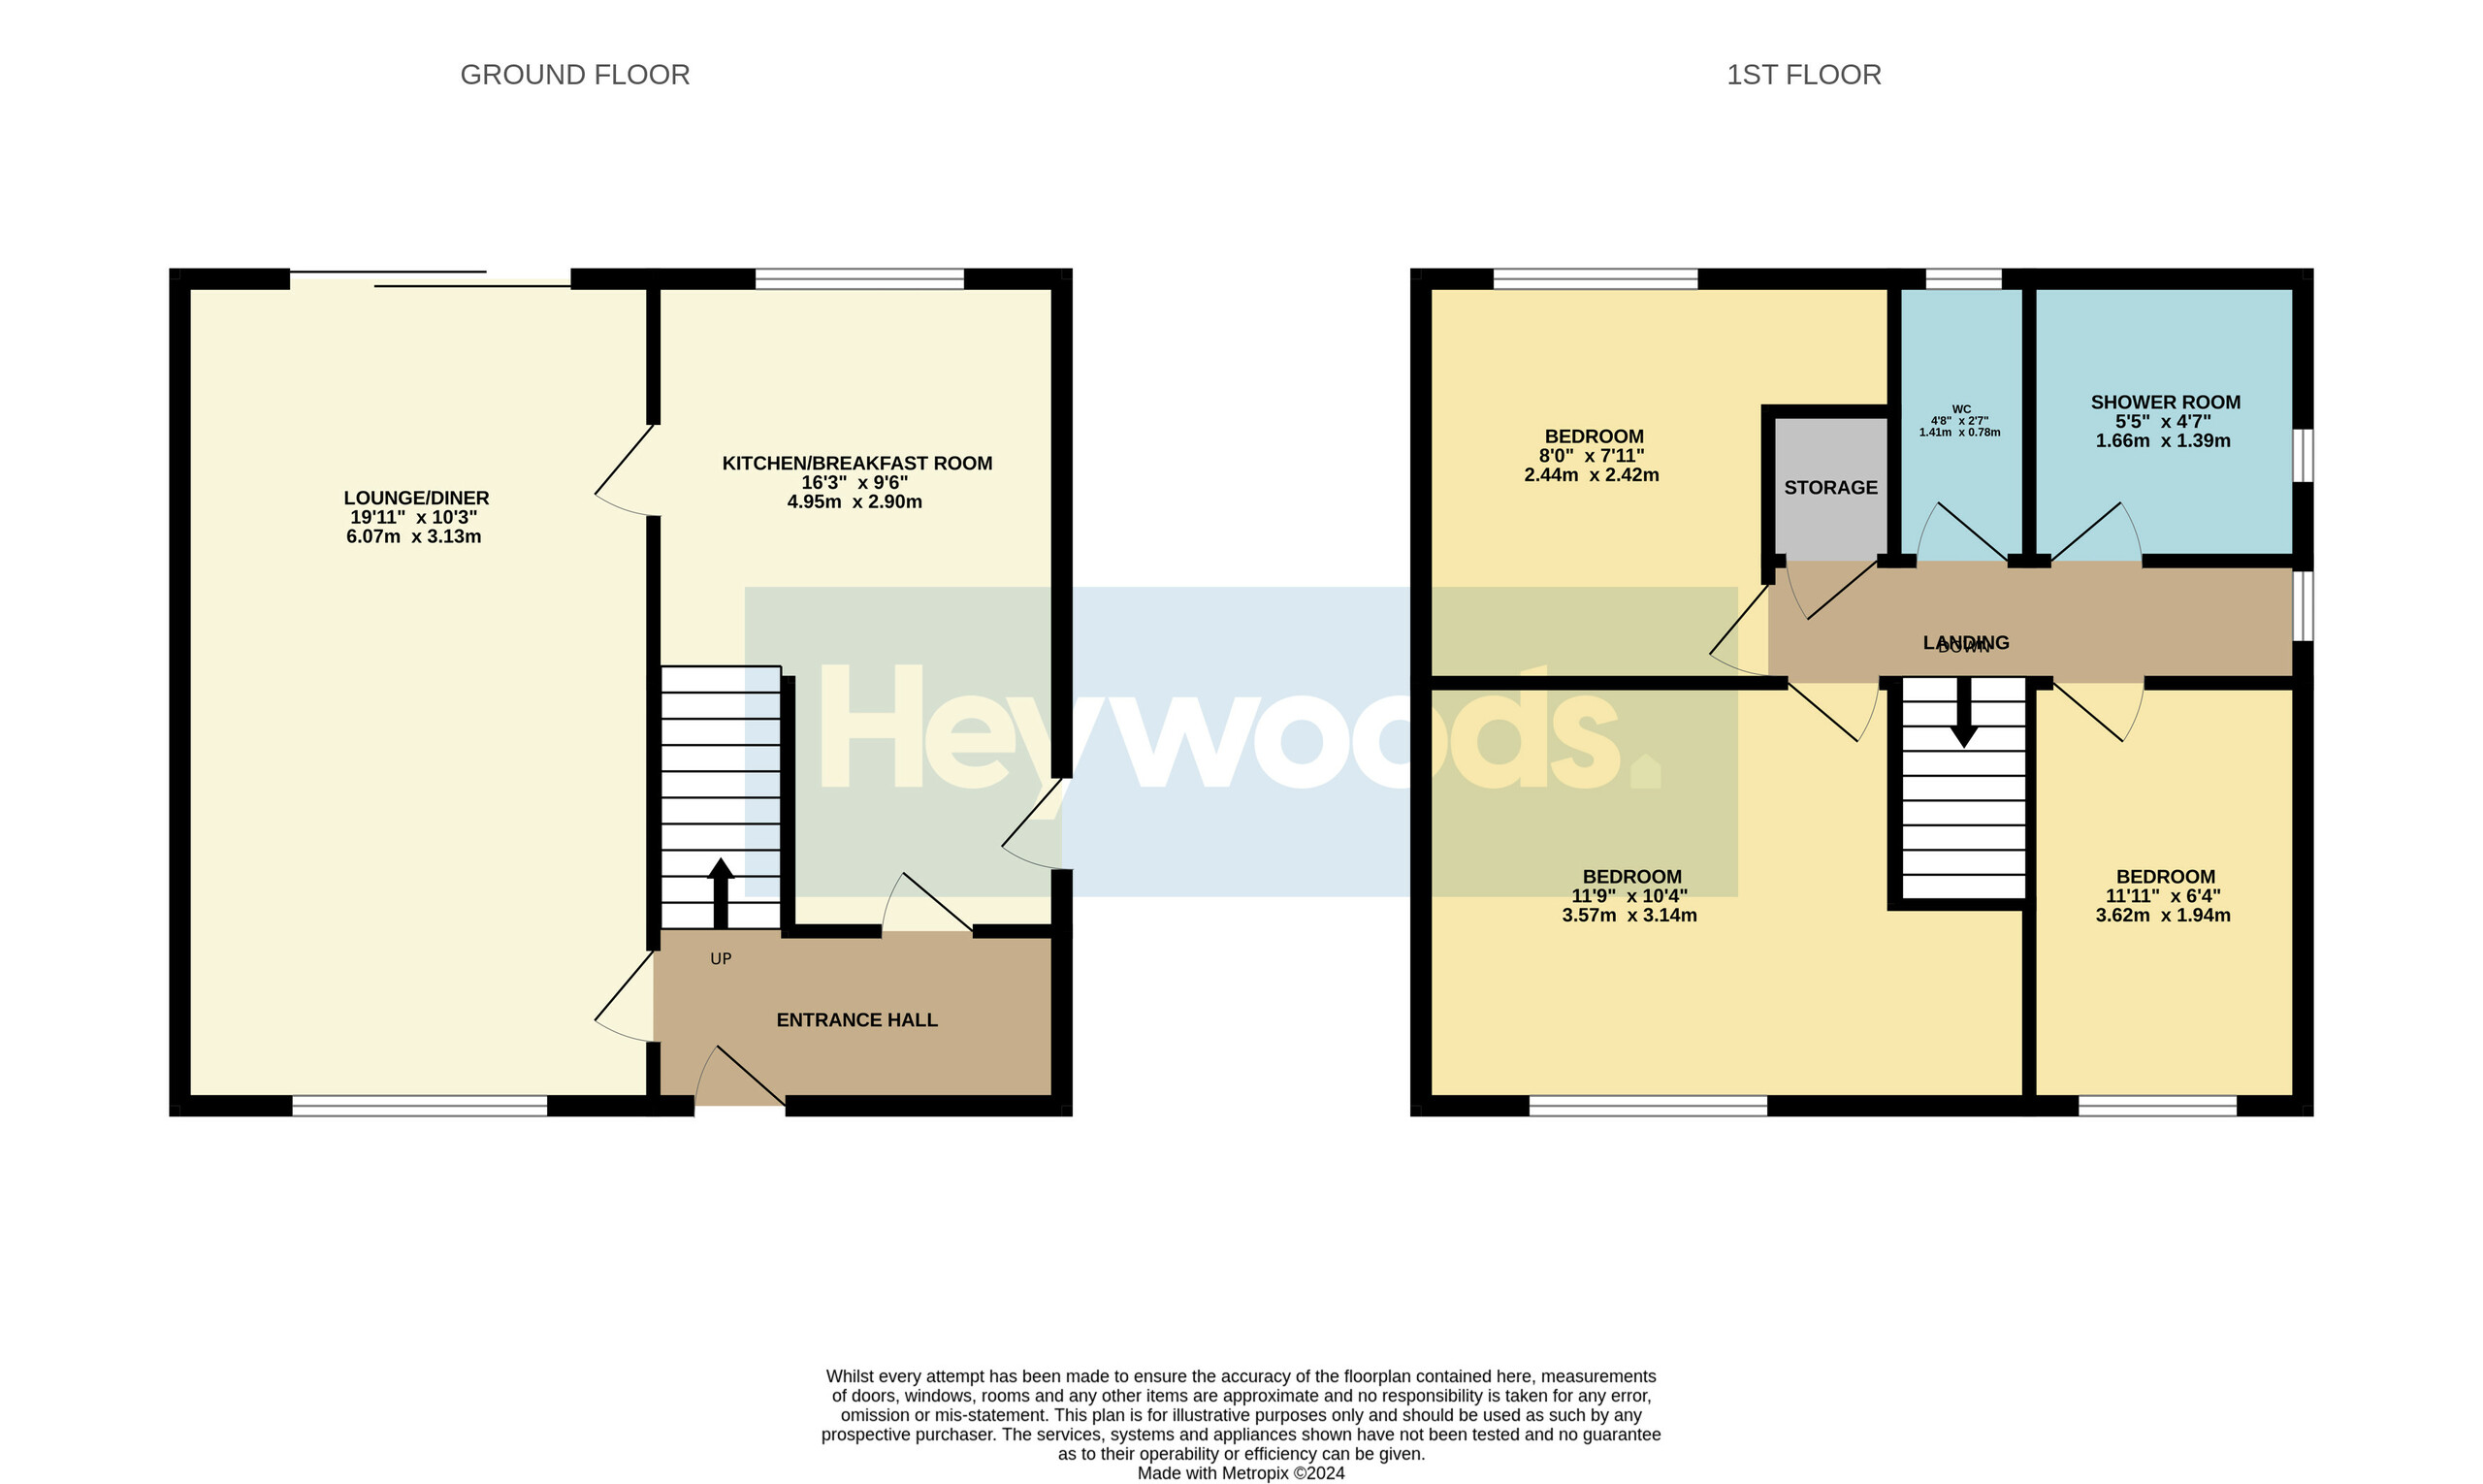 3 bed semi-detached house for sale in Knutton, Newcastle-under-Lyme - Property floorplan